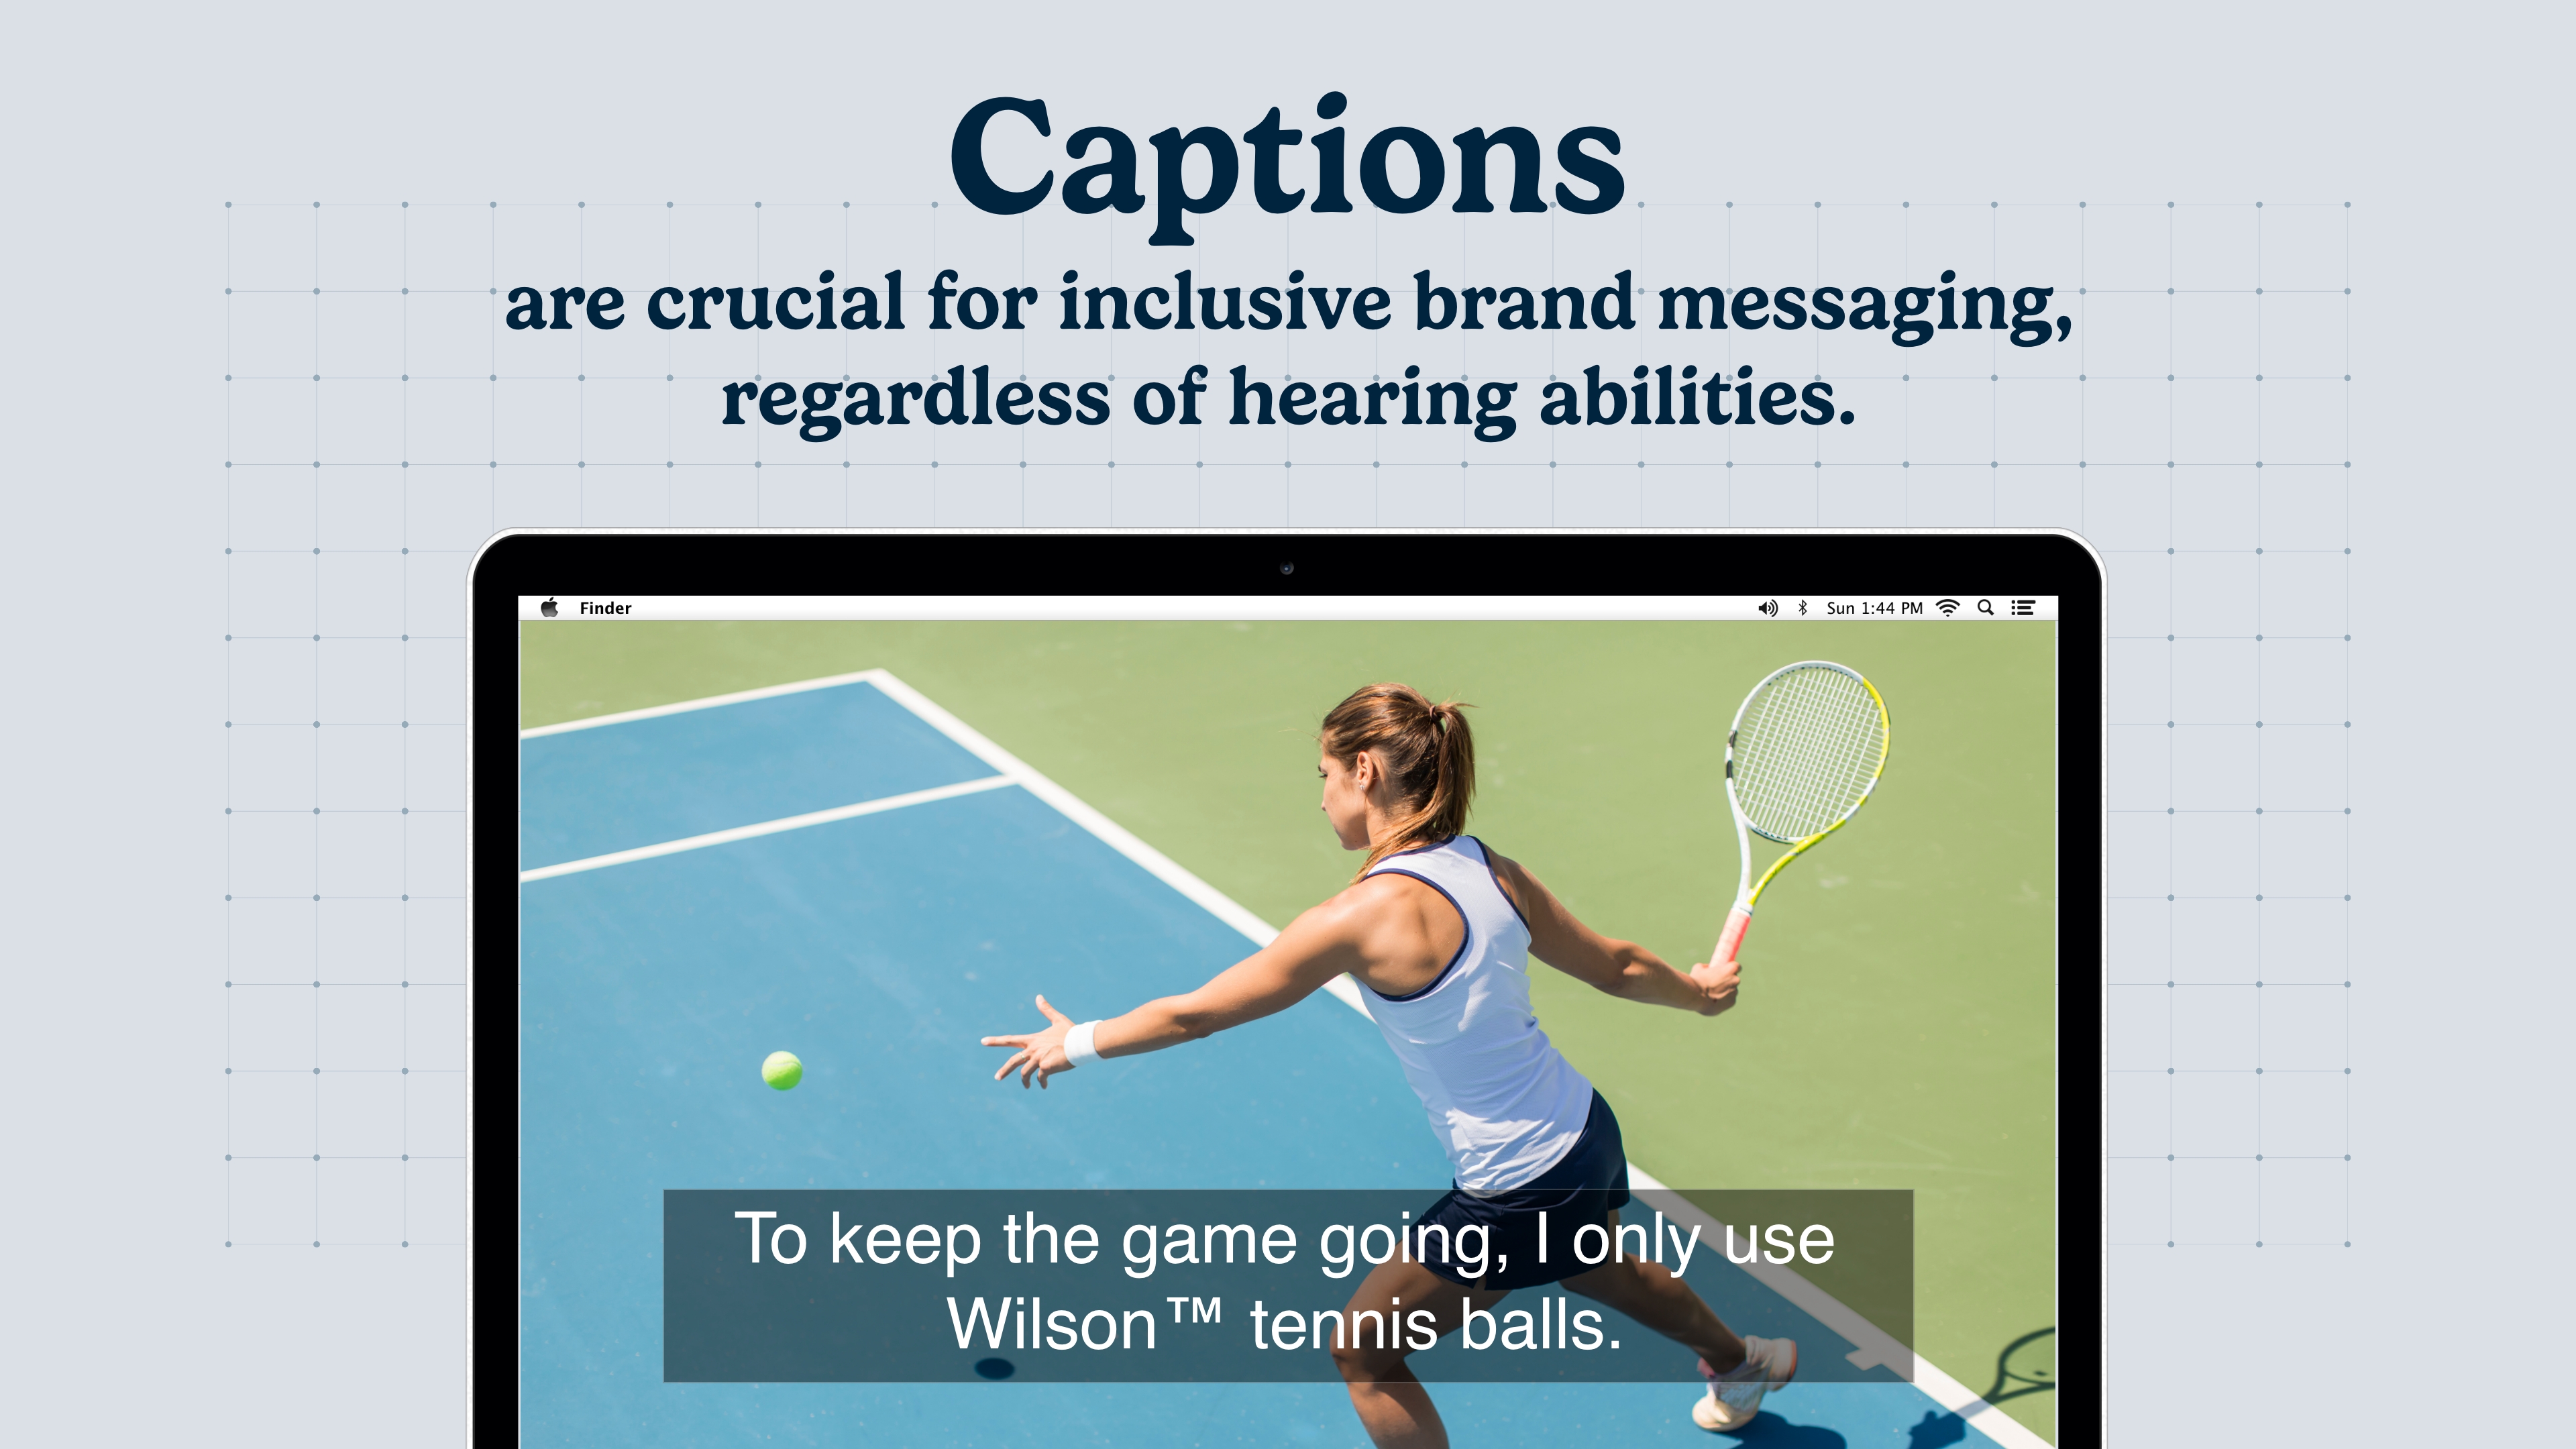 Shows a tennis commercial with corresponding captions. Features the copy "Captions are crucial for inclusive brand messaging, regardless of hearing abilities" 